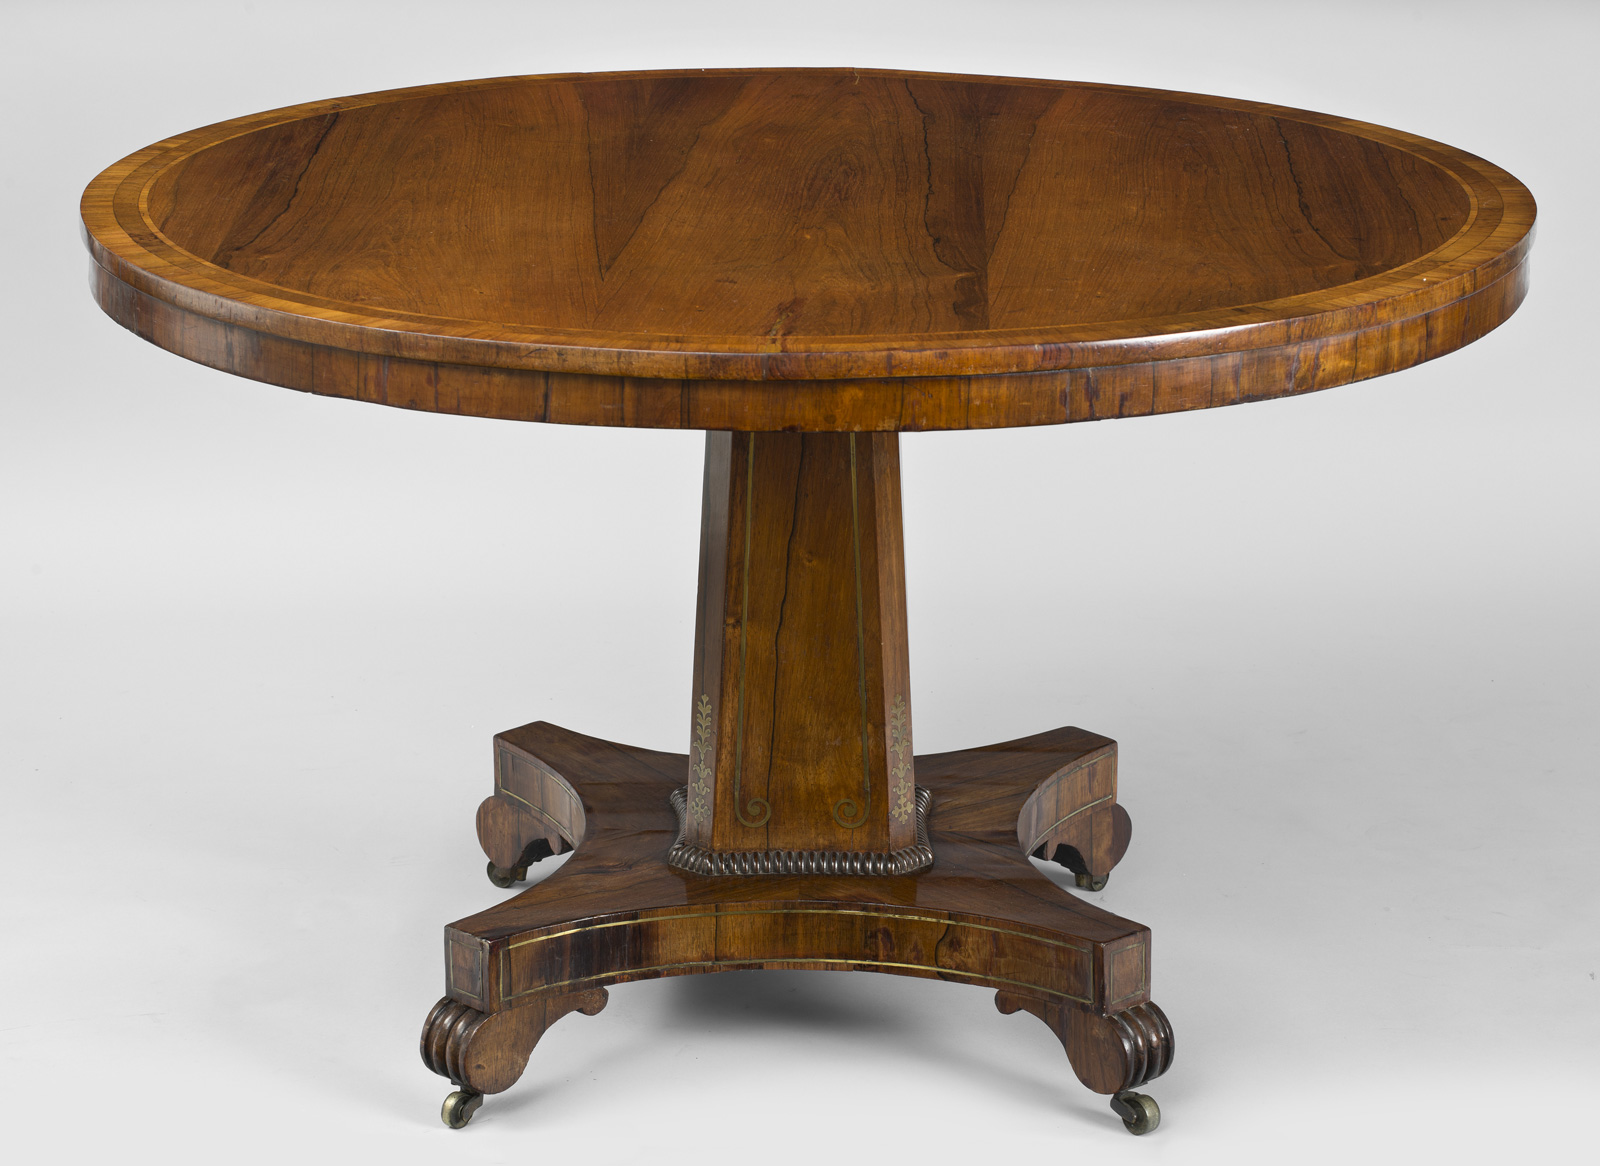 Antique English Regency Dining Room Table